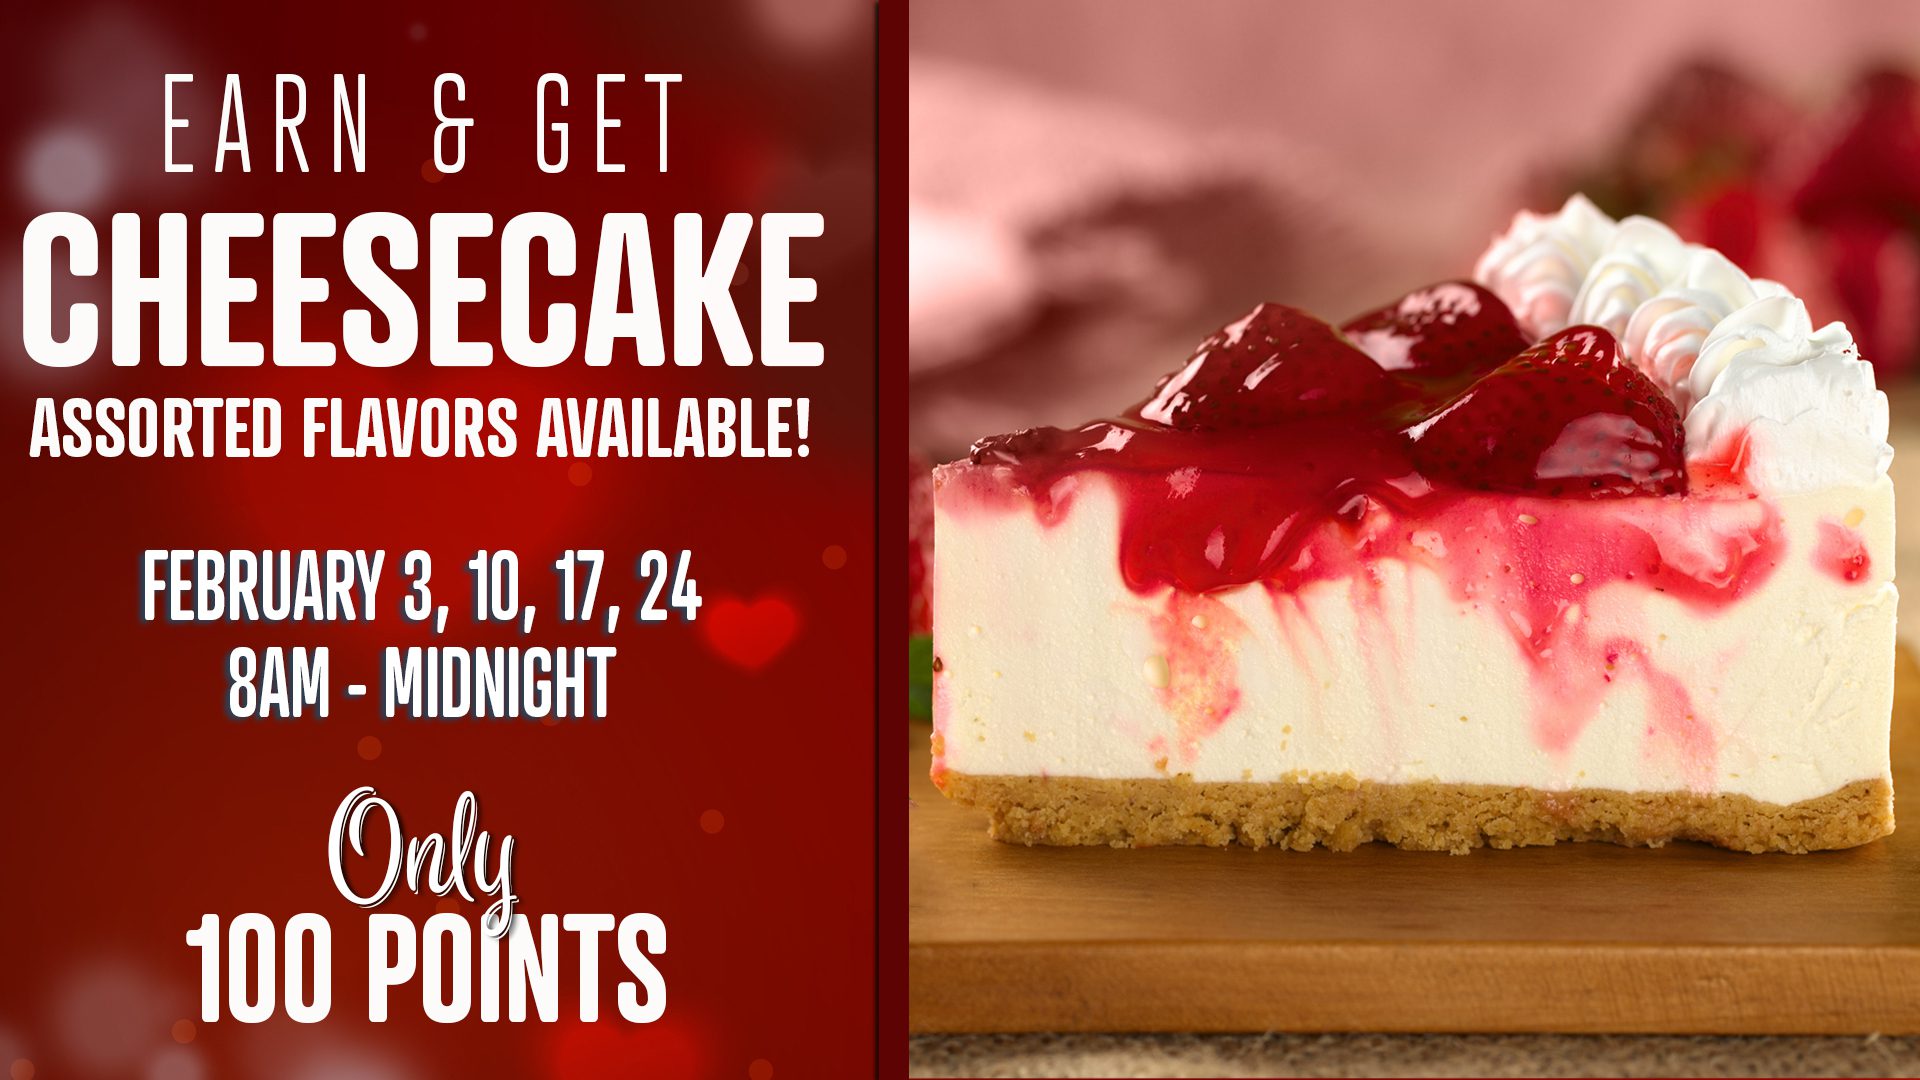 Promotional ad for a cheesecake offer available in assorted flavors on selected dates, requiring 100 points for redemption.